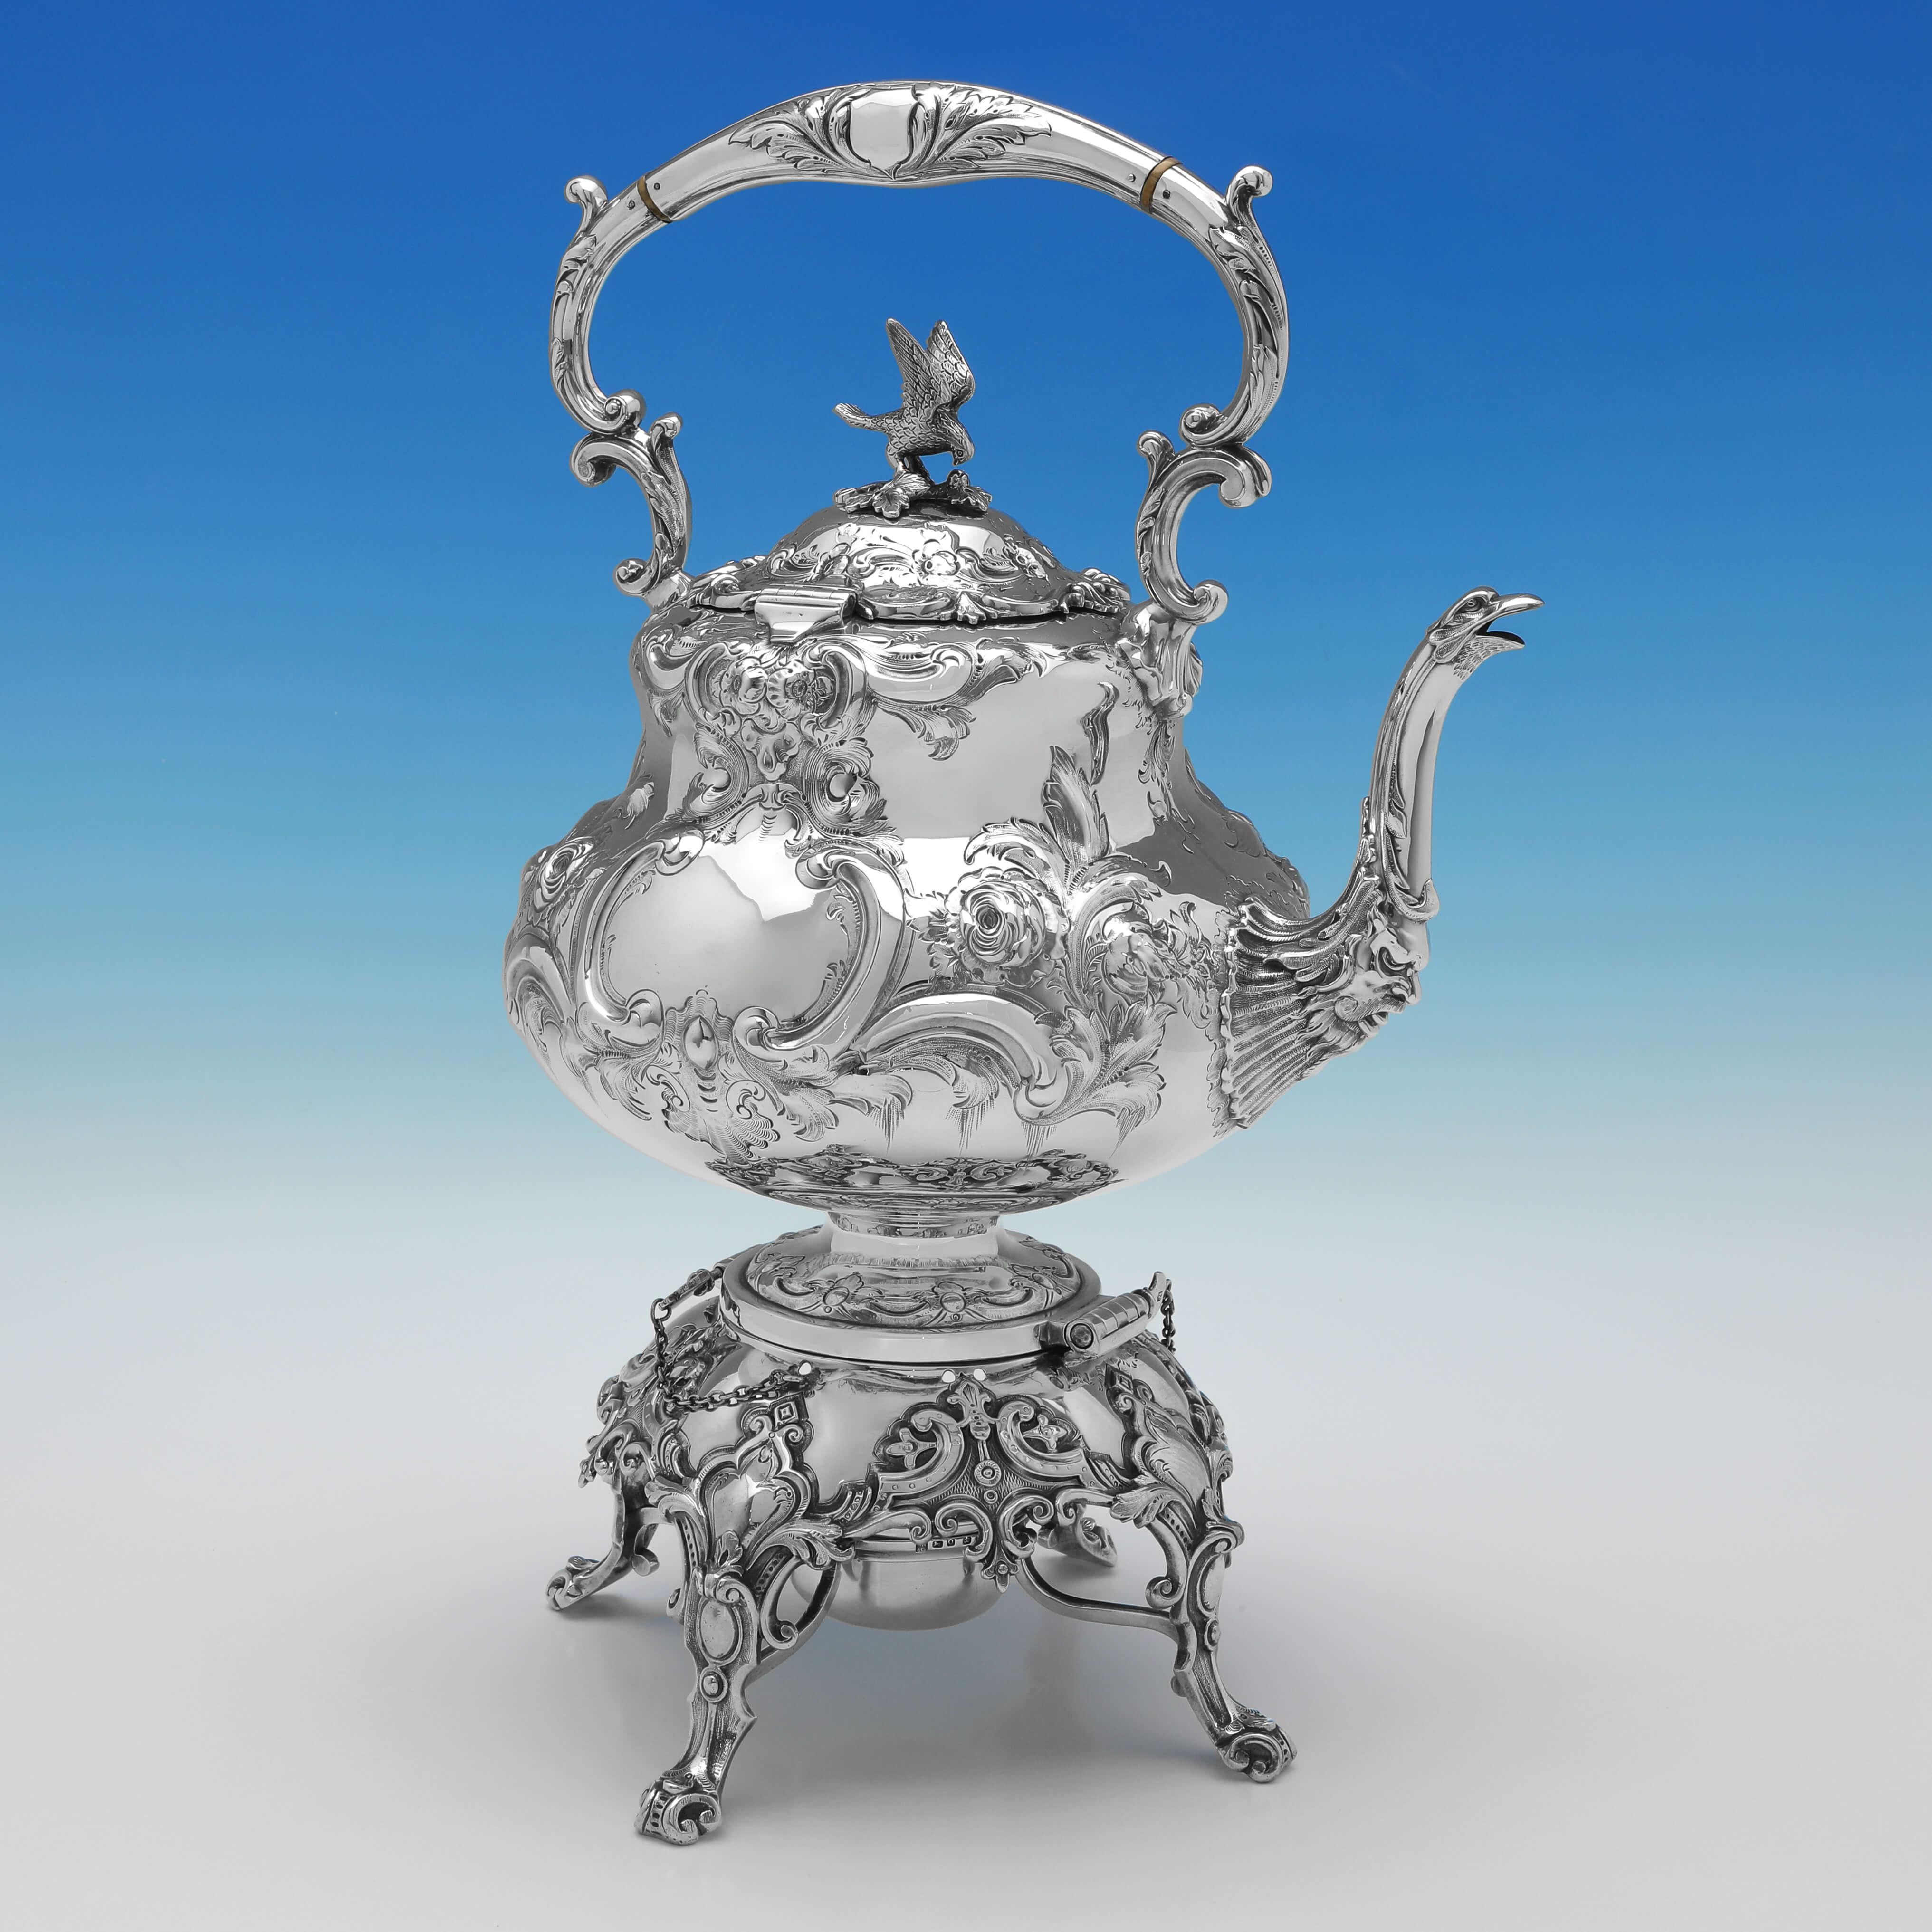 Hallmarked in Sheffield in 1881 by Martin, Hall & Co., this very attractive, Antique Sterling Silver Kettle, is in the sought after 'Louis' pattern. 

The kettle measures 17